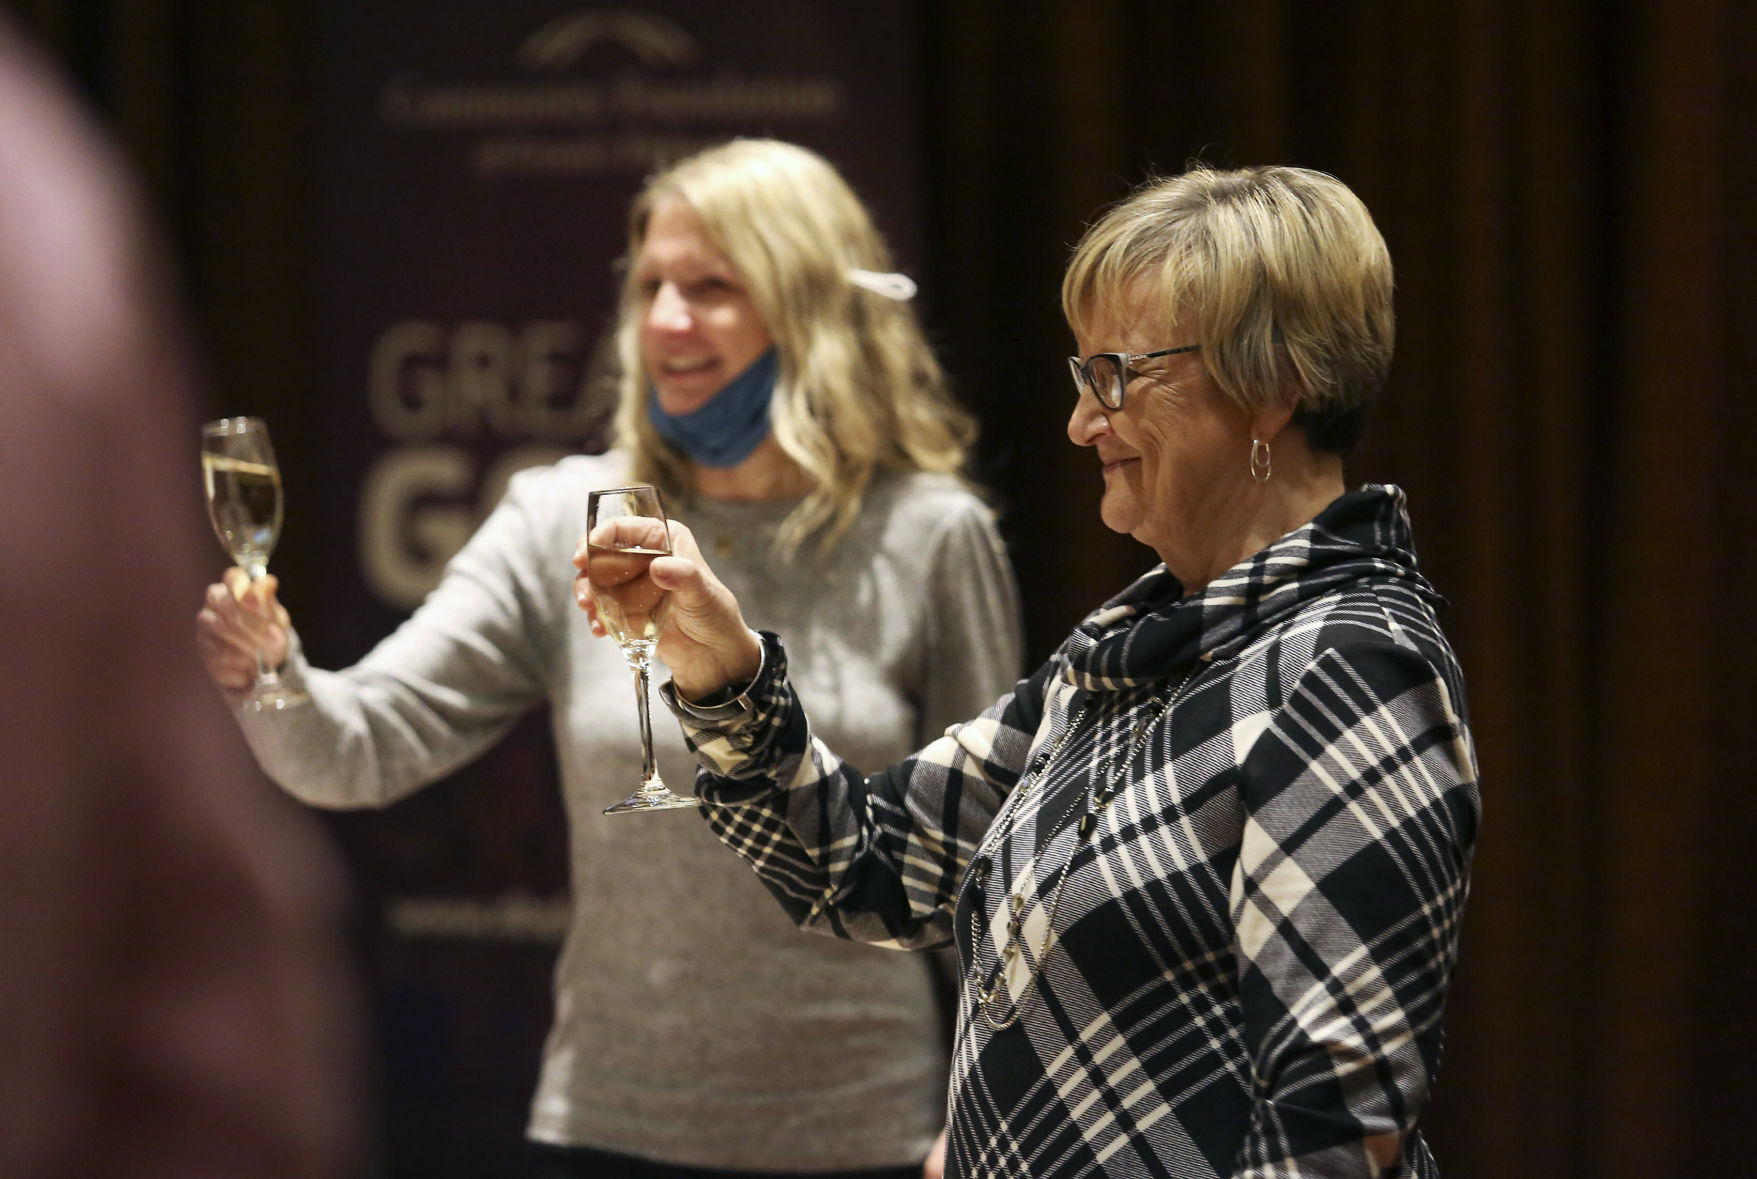 Judy Wolf, recipient of the 2020 Telegraph Herald First Citizen Award, attends a reception at Diamond Jo Casino in Dubuque on Thursday, Jan. 28, 2021.    PHOTO CREDIT: NICKI KOHL